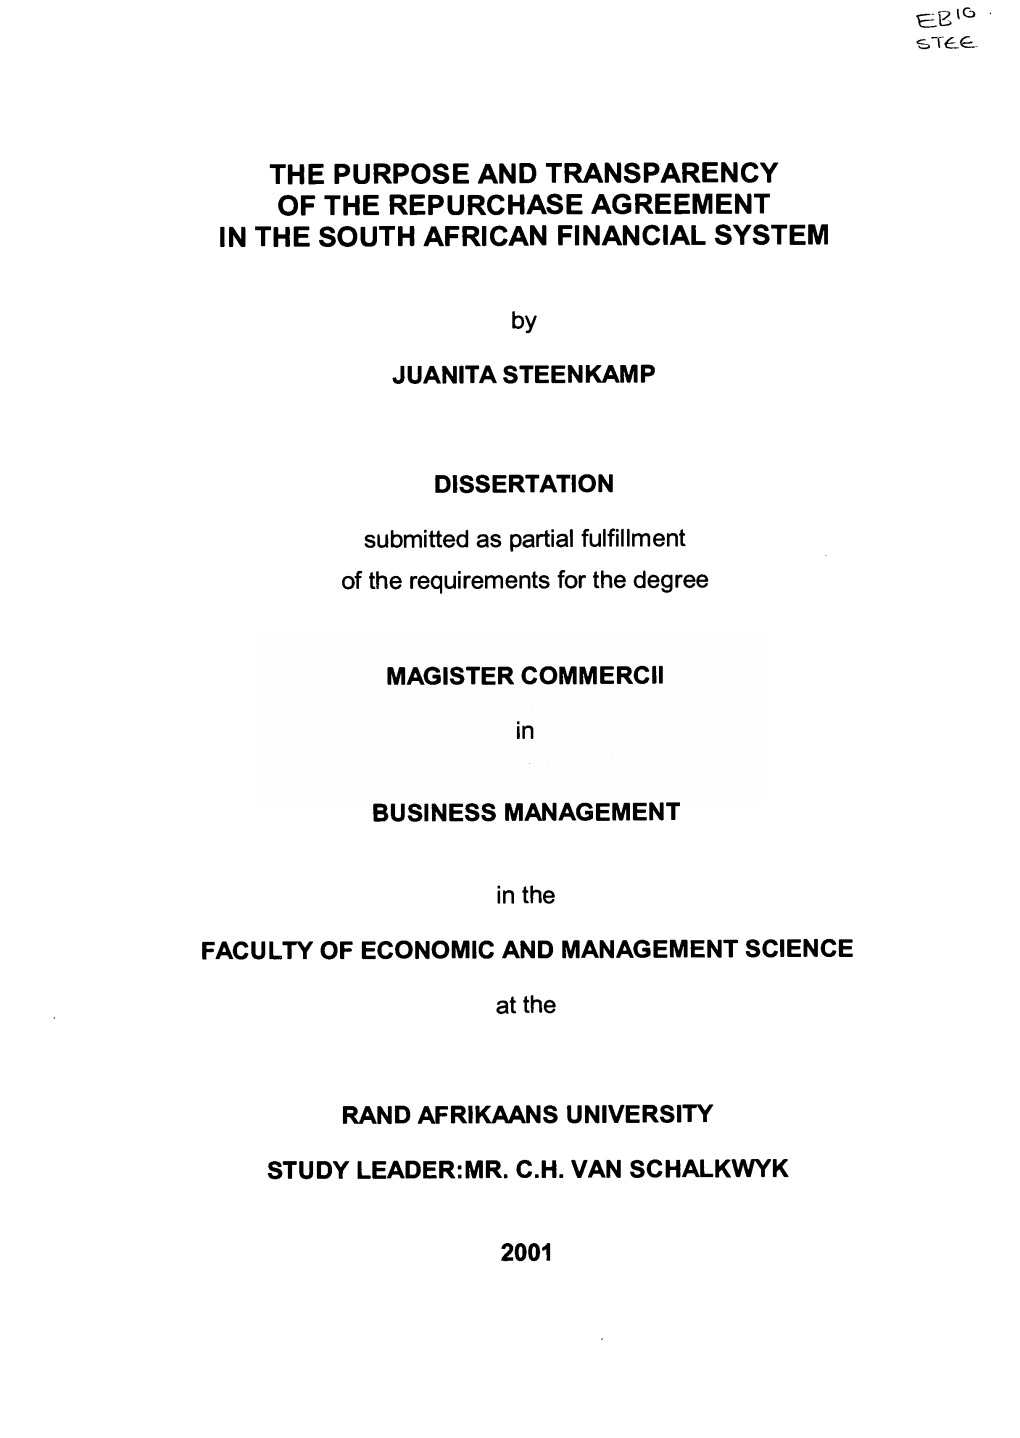 The Purpose and Transparency of the Repurchase Agreement in the South African Financial System